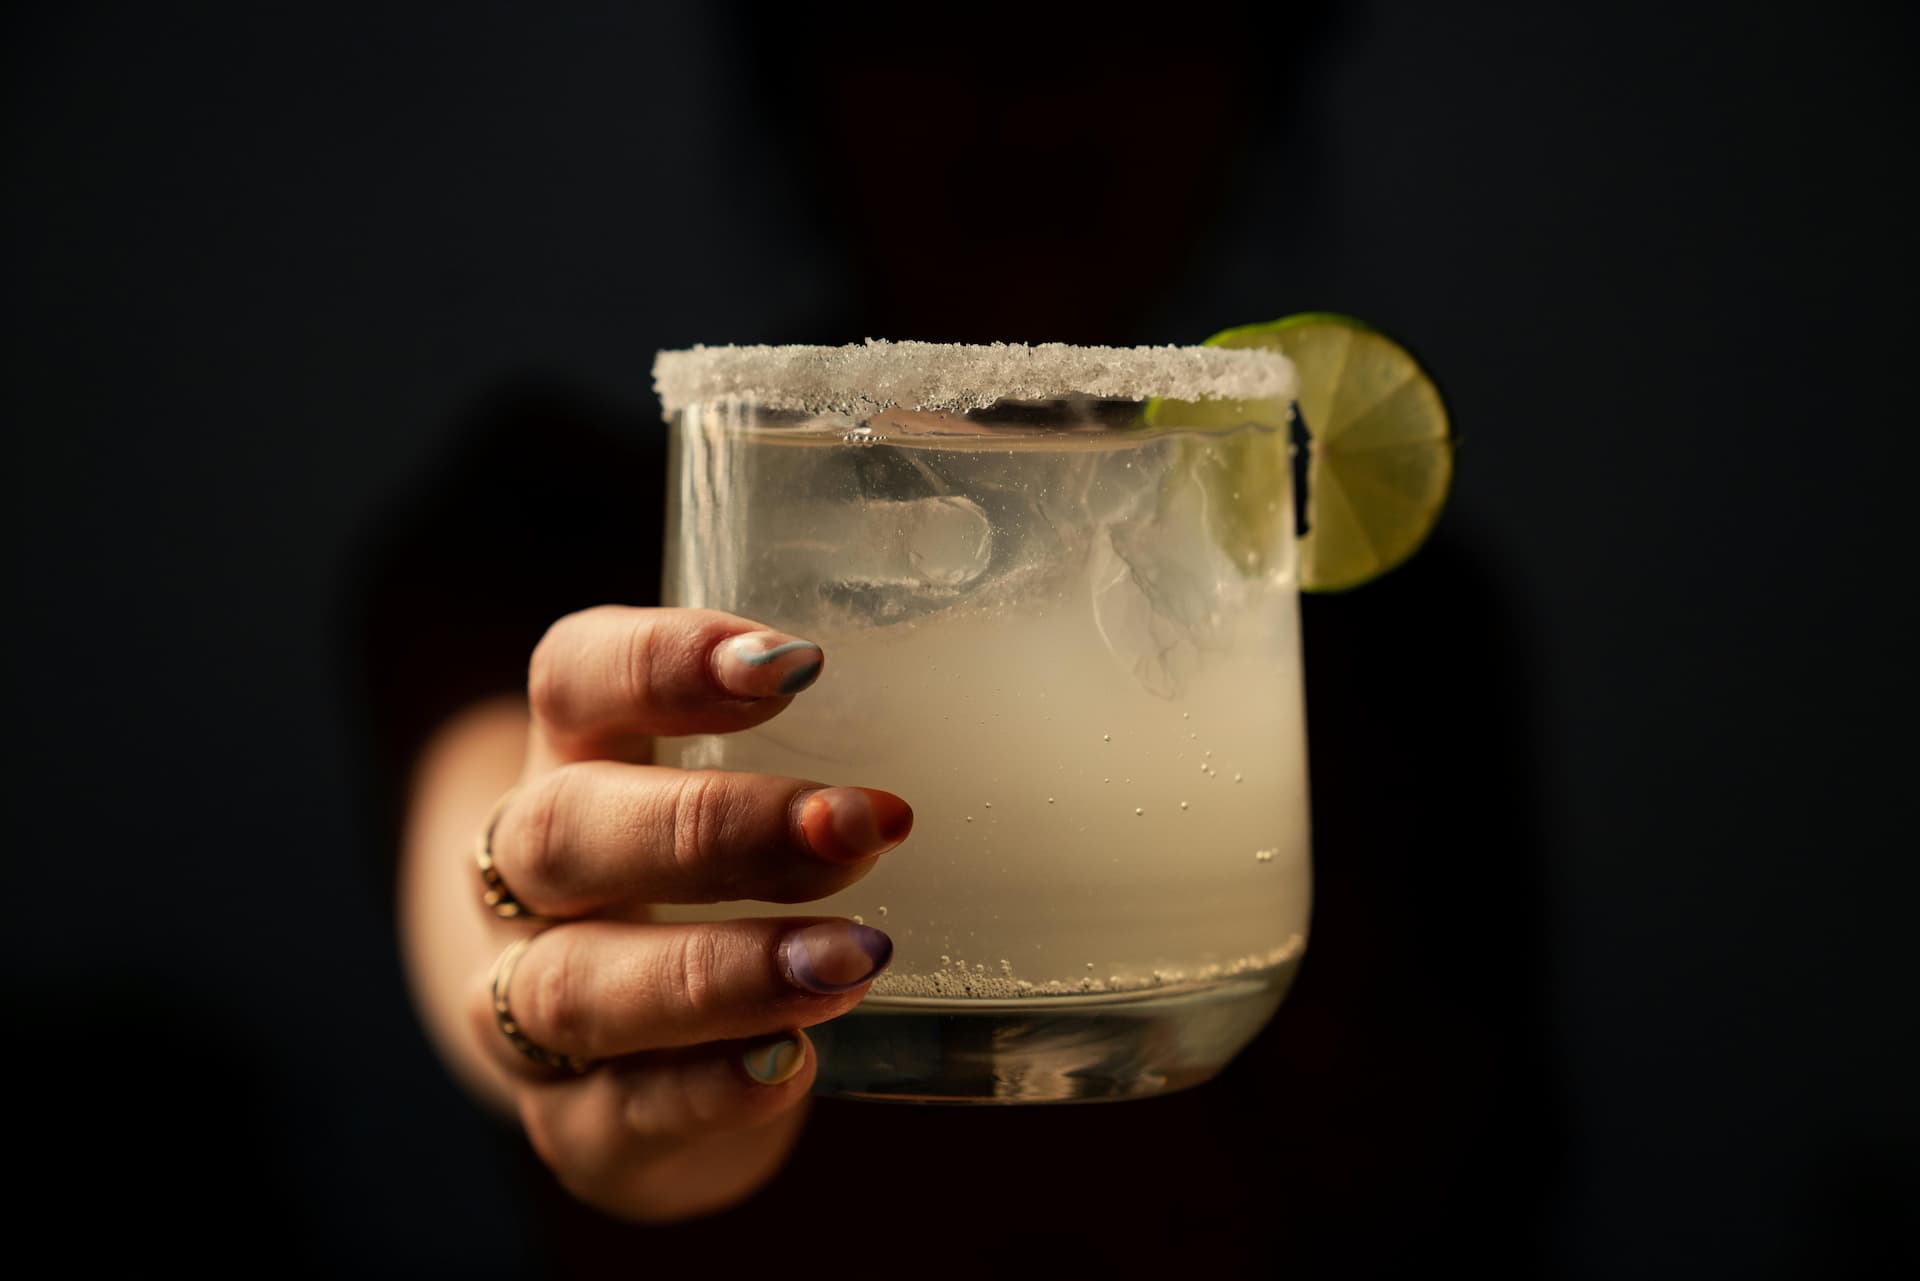 Have You Tried Margaritas With A Jal Jeera Twist? Two Recipes That Blend Best of Two Worlds